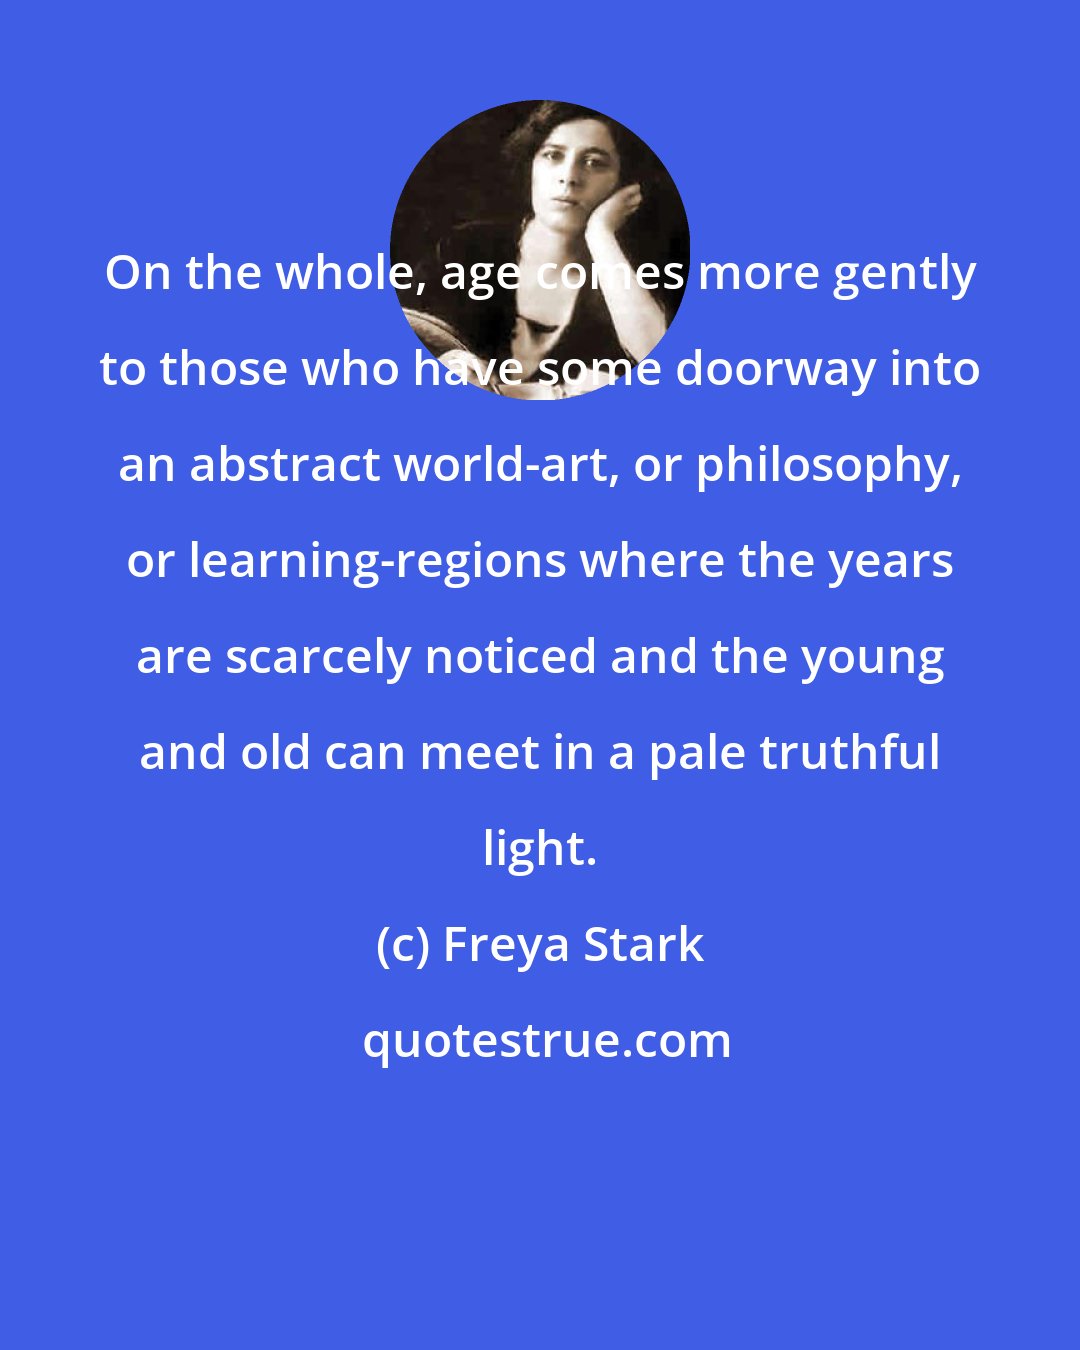 Freya Stark: On the whole, age comes more gently to those who have some doorway into an abstract world-art, or philosophy, or learning-regions where the years are scarcely noticed and the young and old can meet in a pale truthful light.